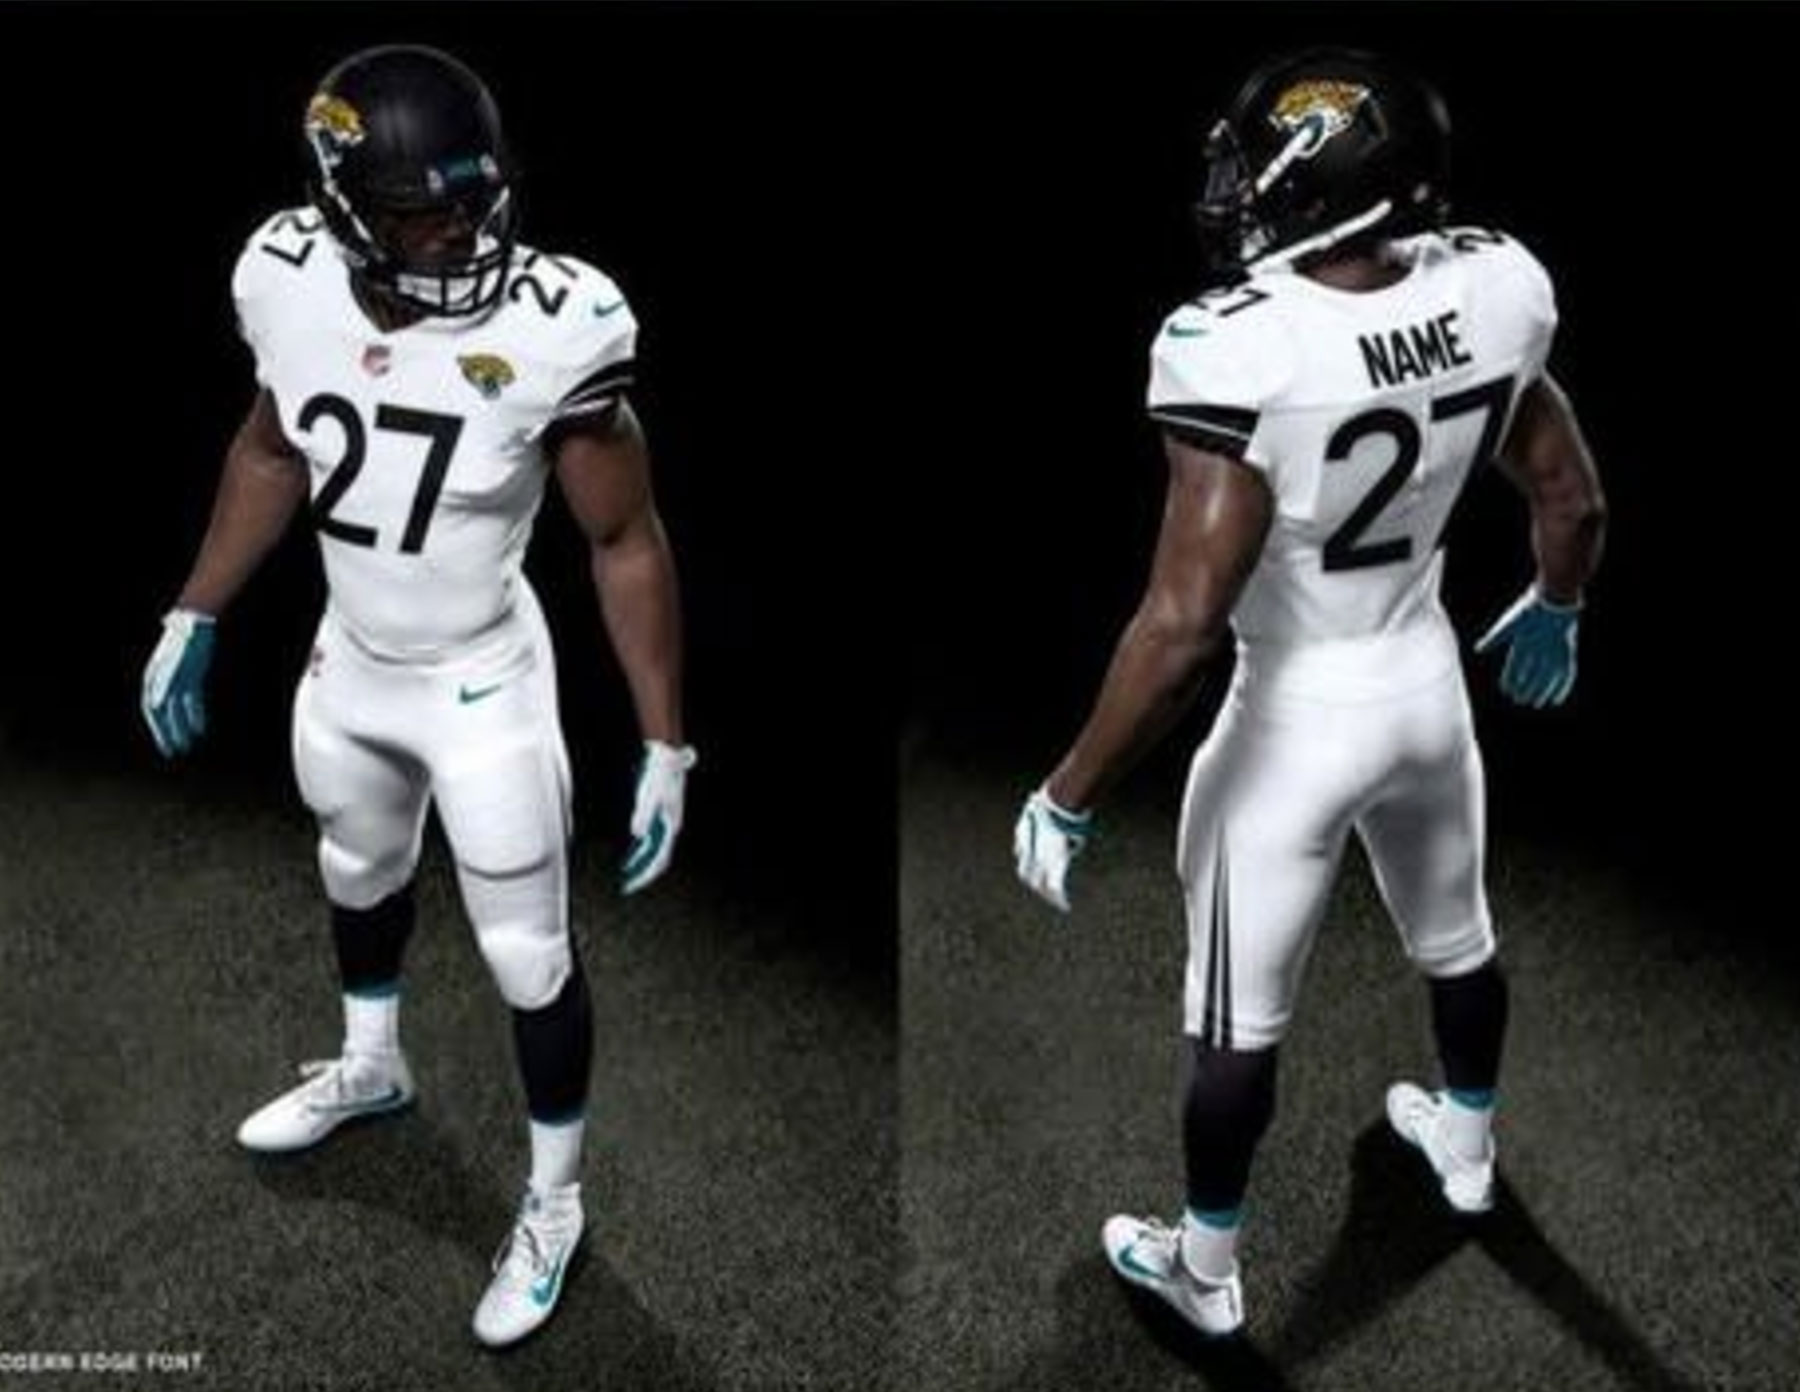 LEAKED Images Of The New Jacksonville Jaguars Uniforms Surface (PICS)